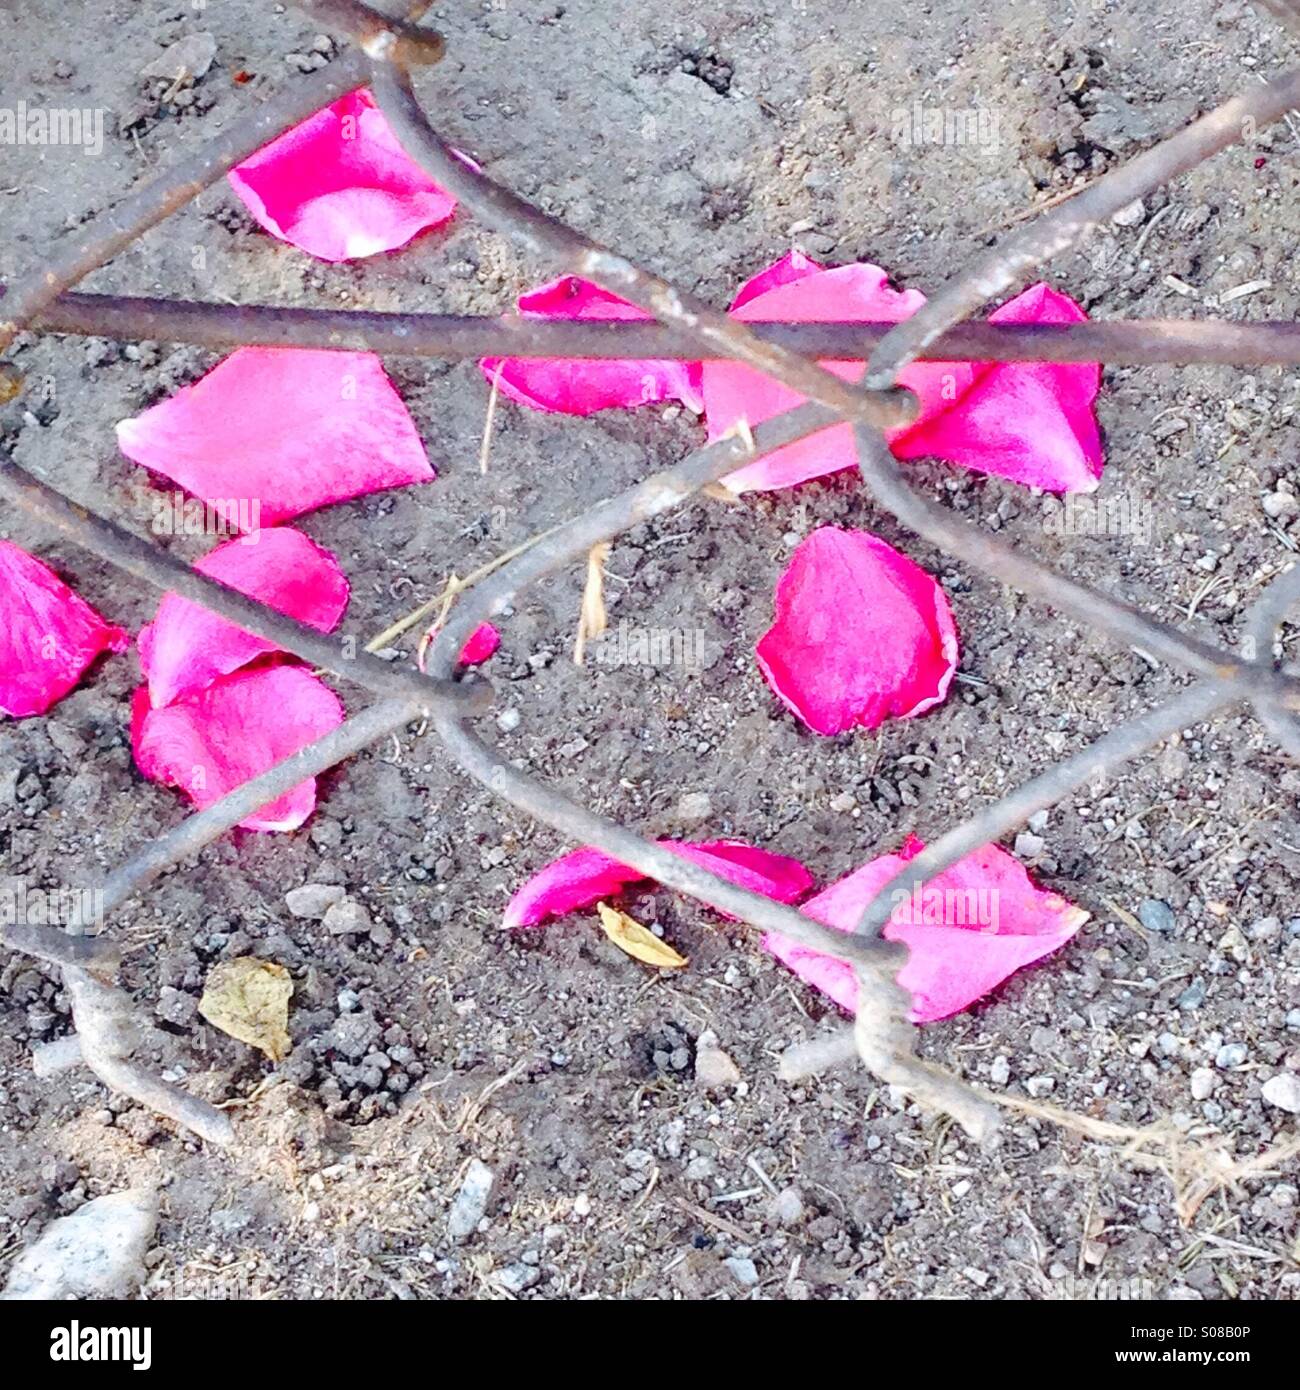 Scattered Pink Rose Petals Behind a Chain Link Fence Stock Photo